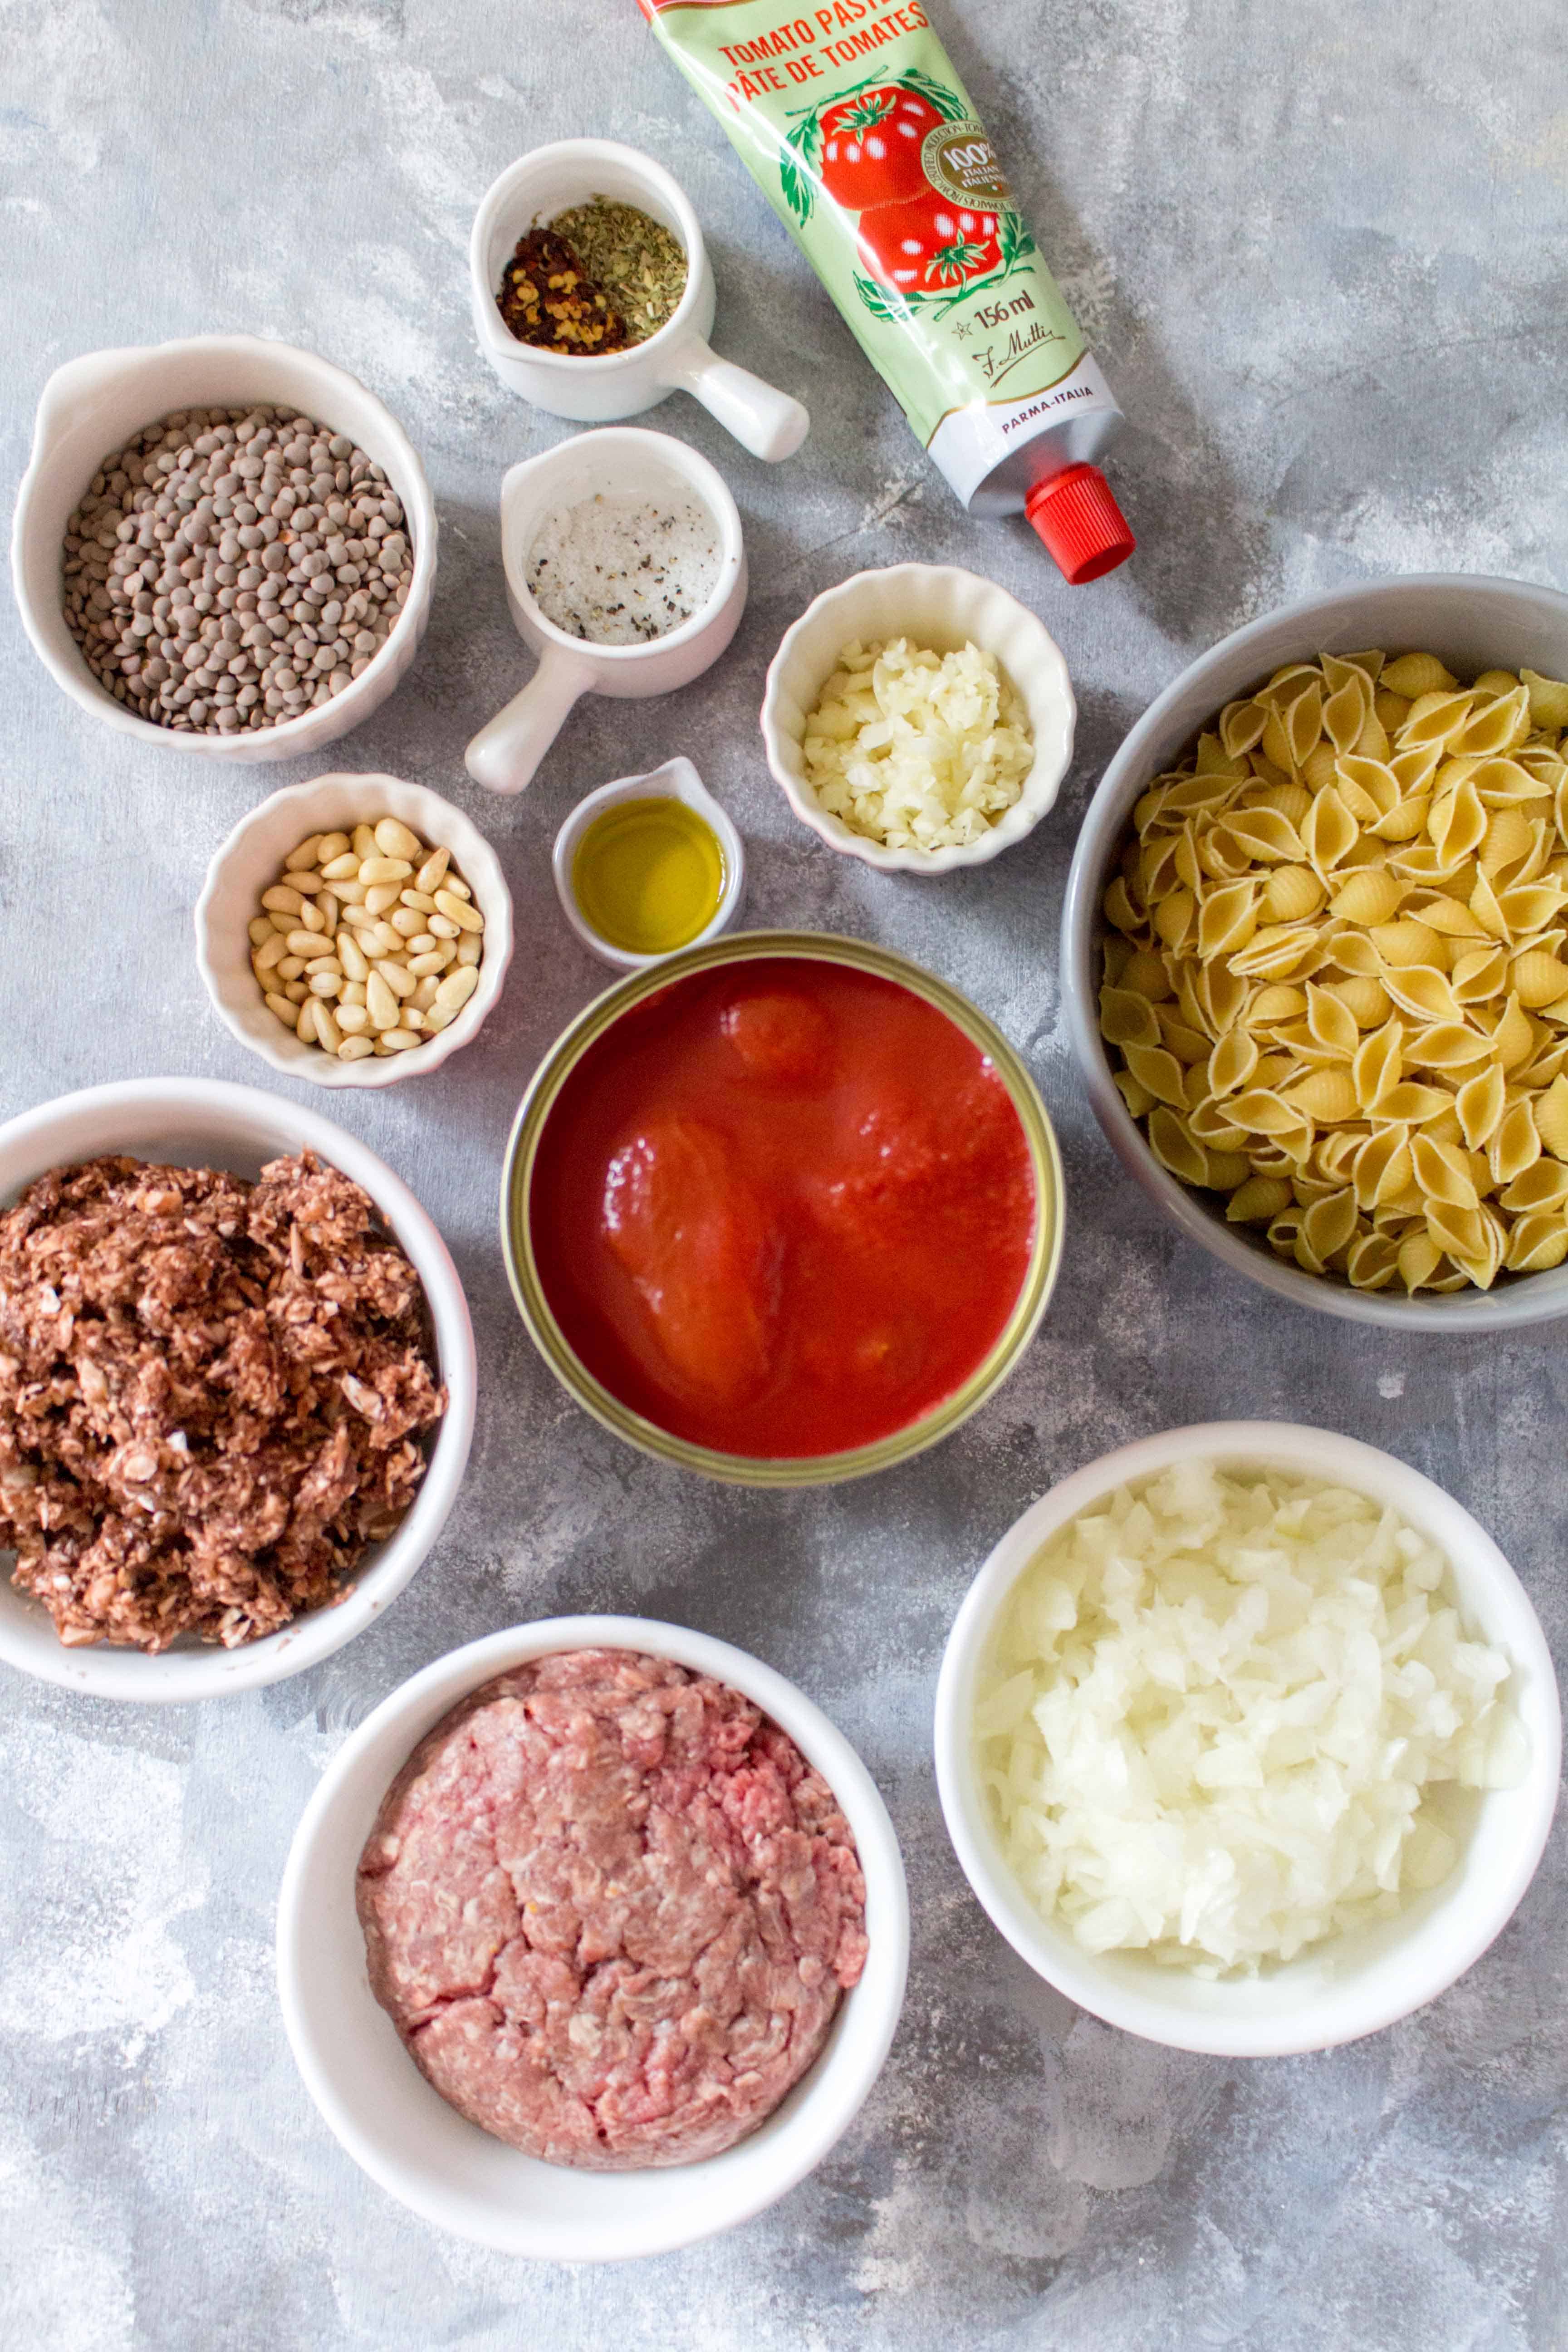 What You'll Need To Make This Healthy Bolognese Meal Prep